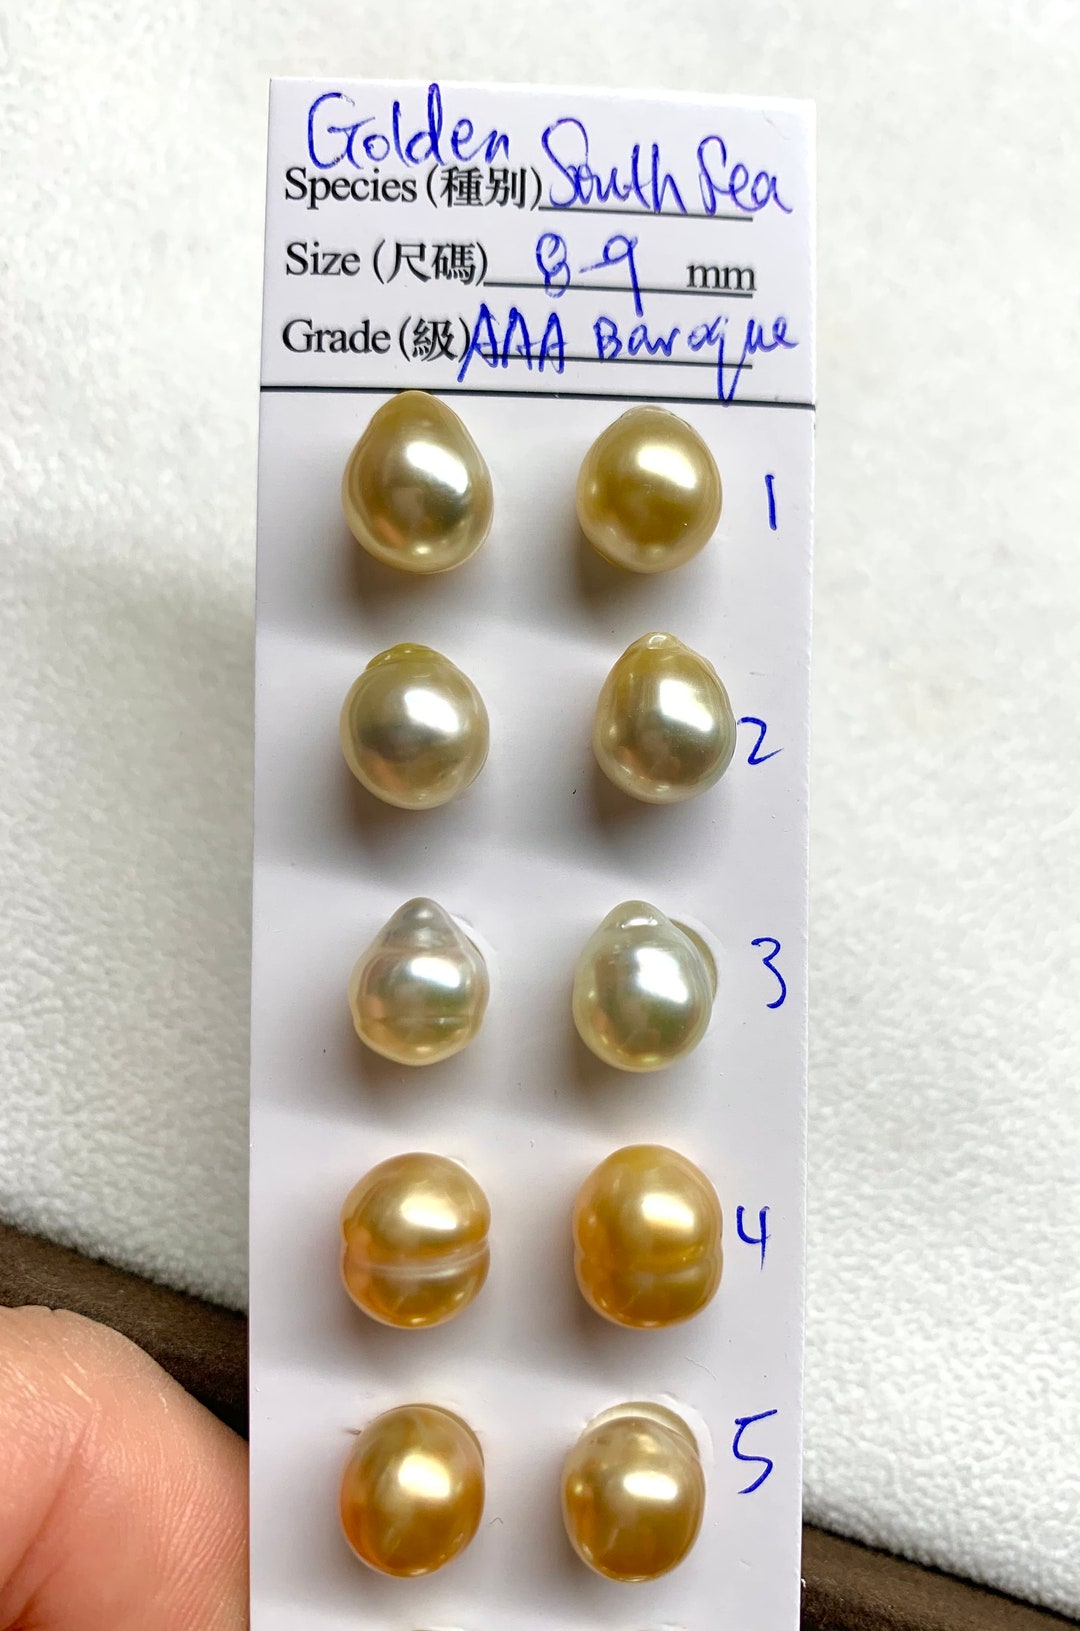 Pearl Value, Price, and Jewelry Information - International Gem Society